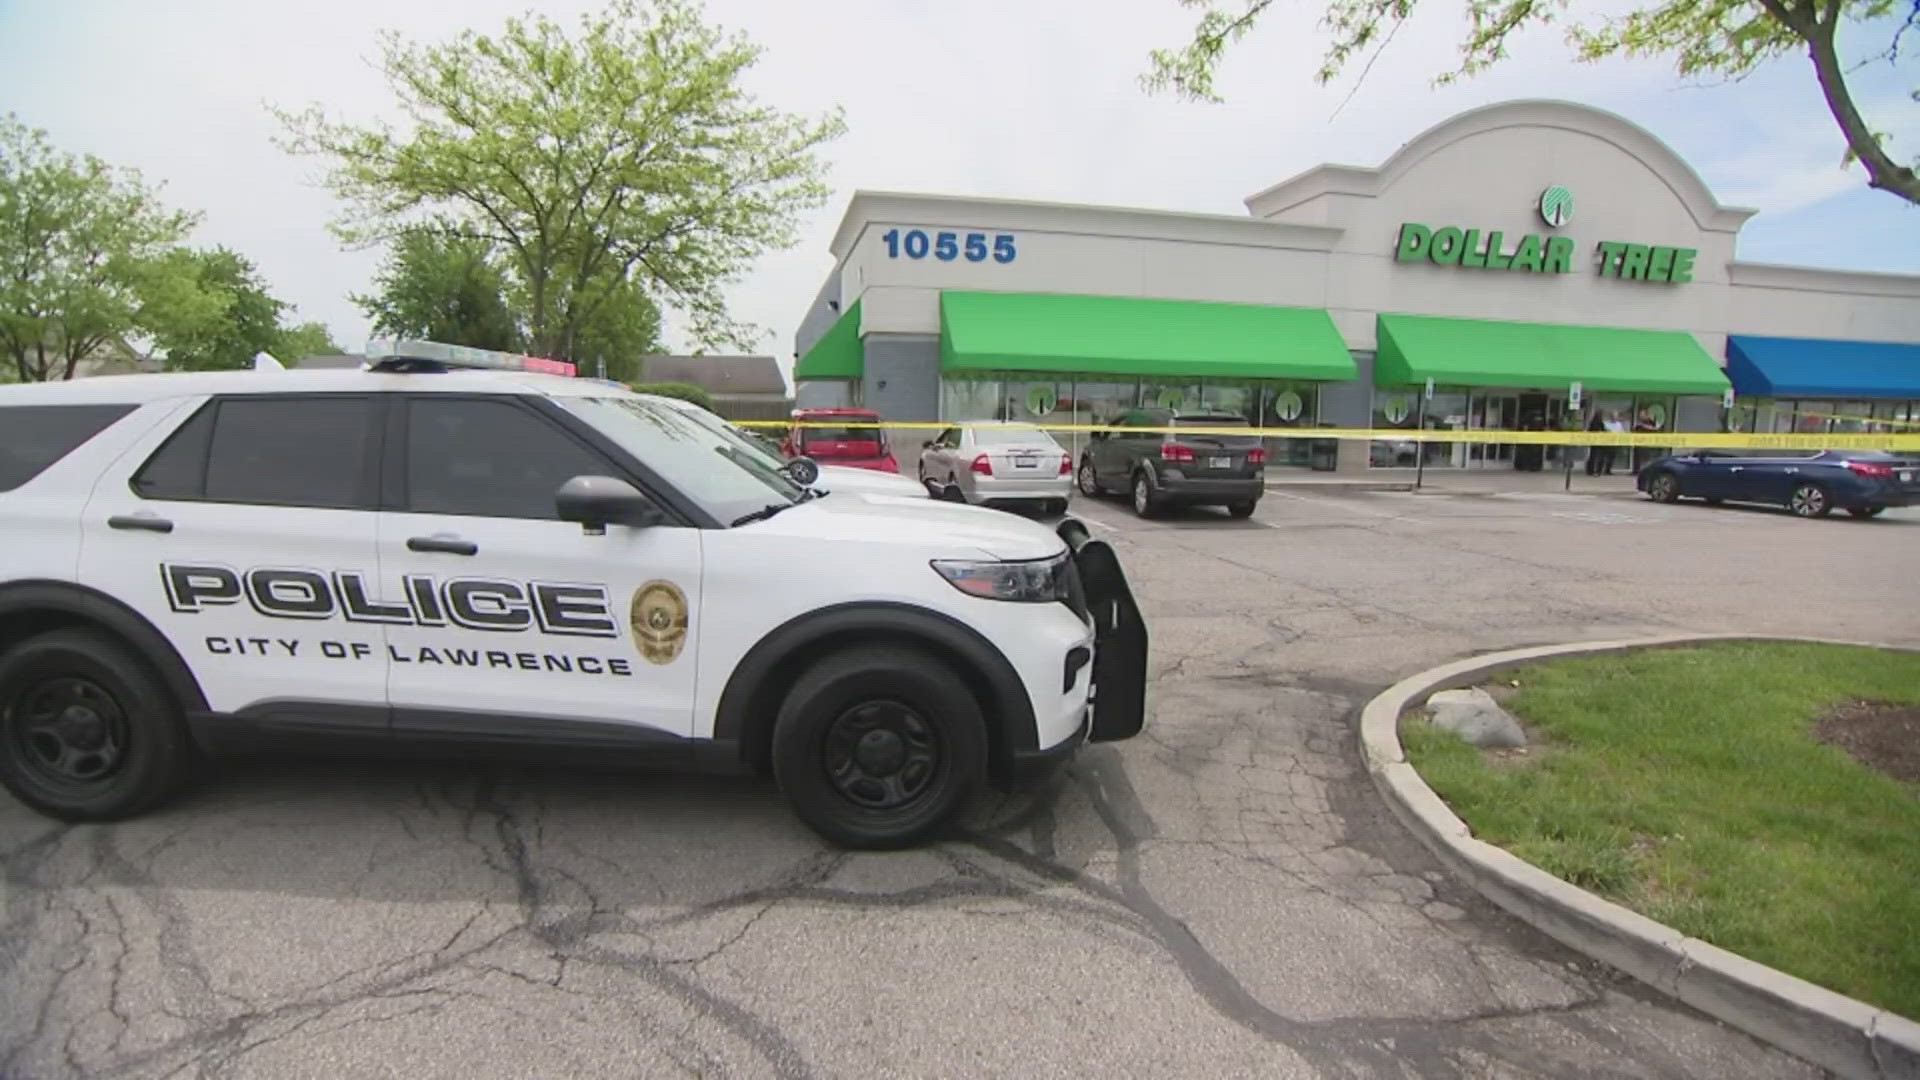 A 25-year-old woman has died after she was shot while working inside a Dollar Tree in Lawrence Monday afternoon.